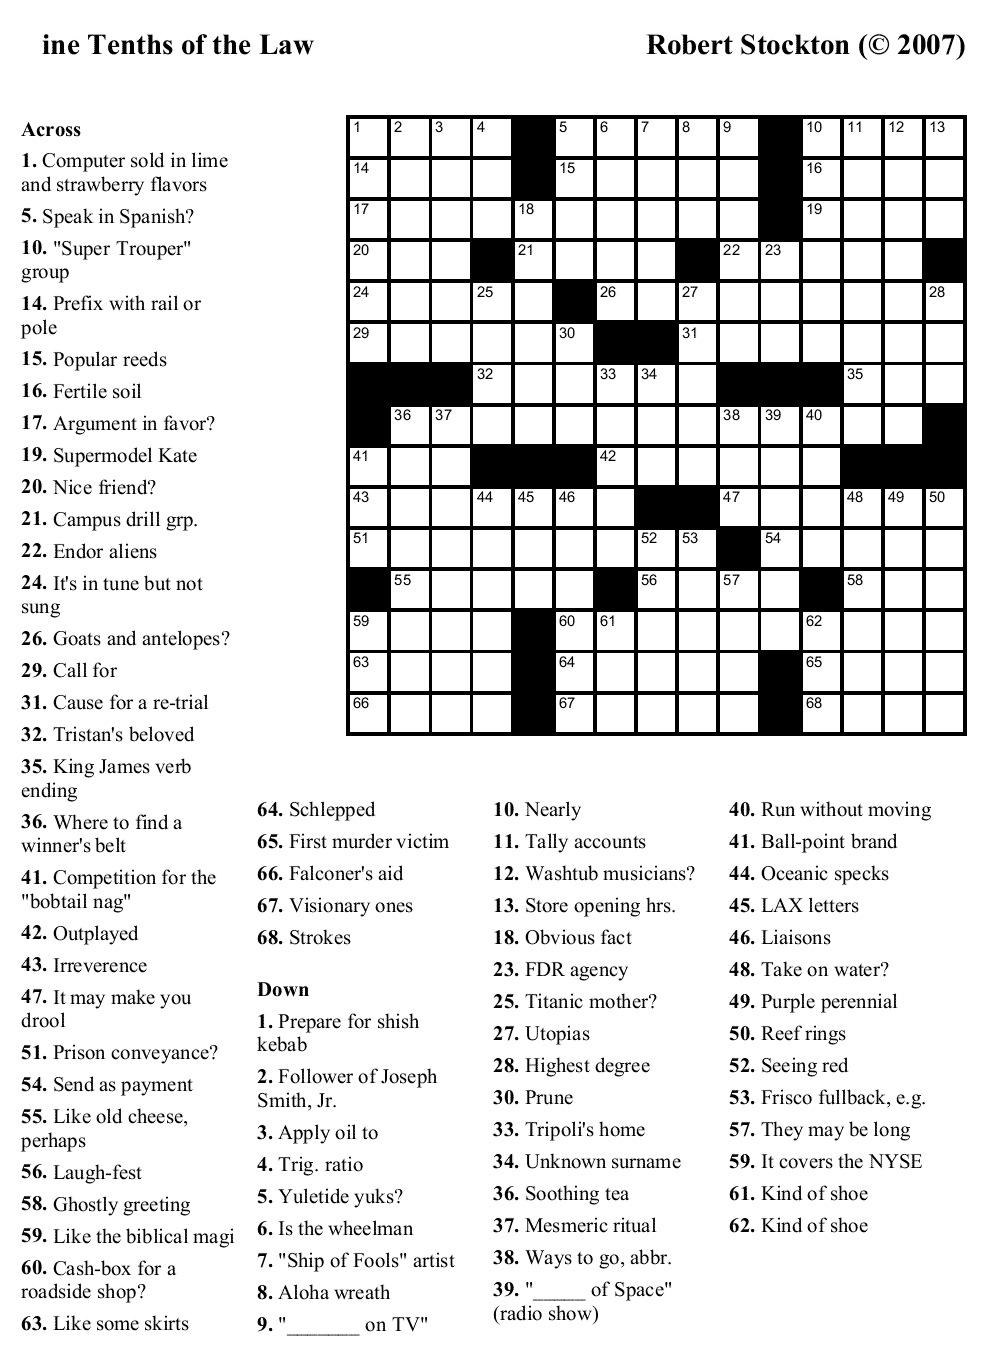 Crossword Puzzles Printable - Yahoo Image Search Results | Crossword - Printable Crossword Puzzles With Themes